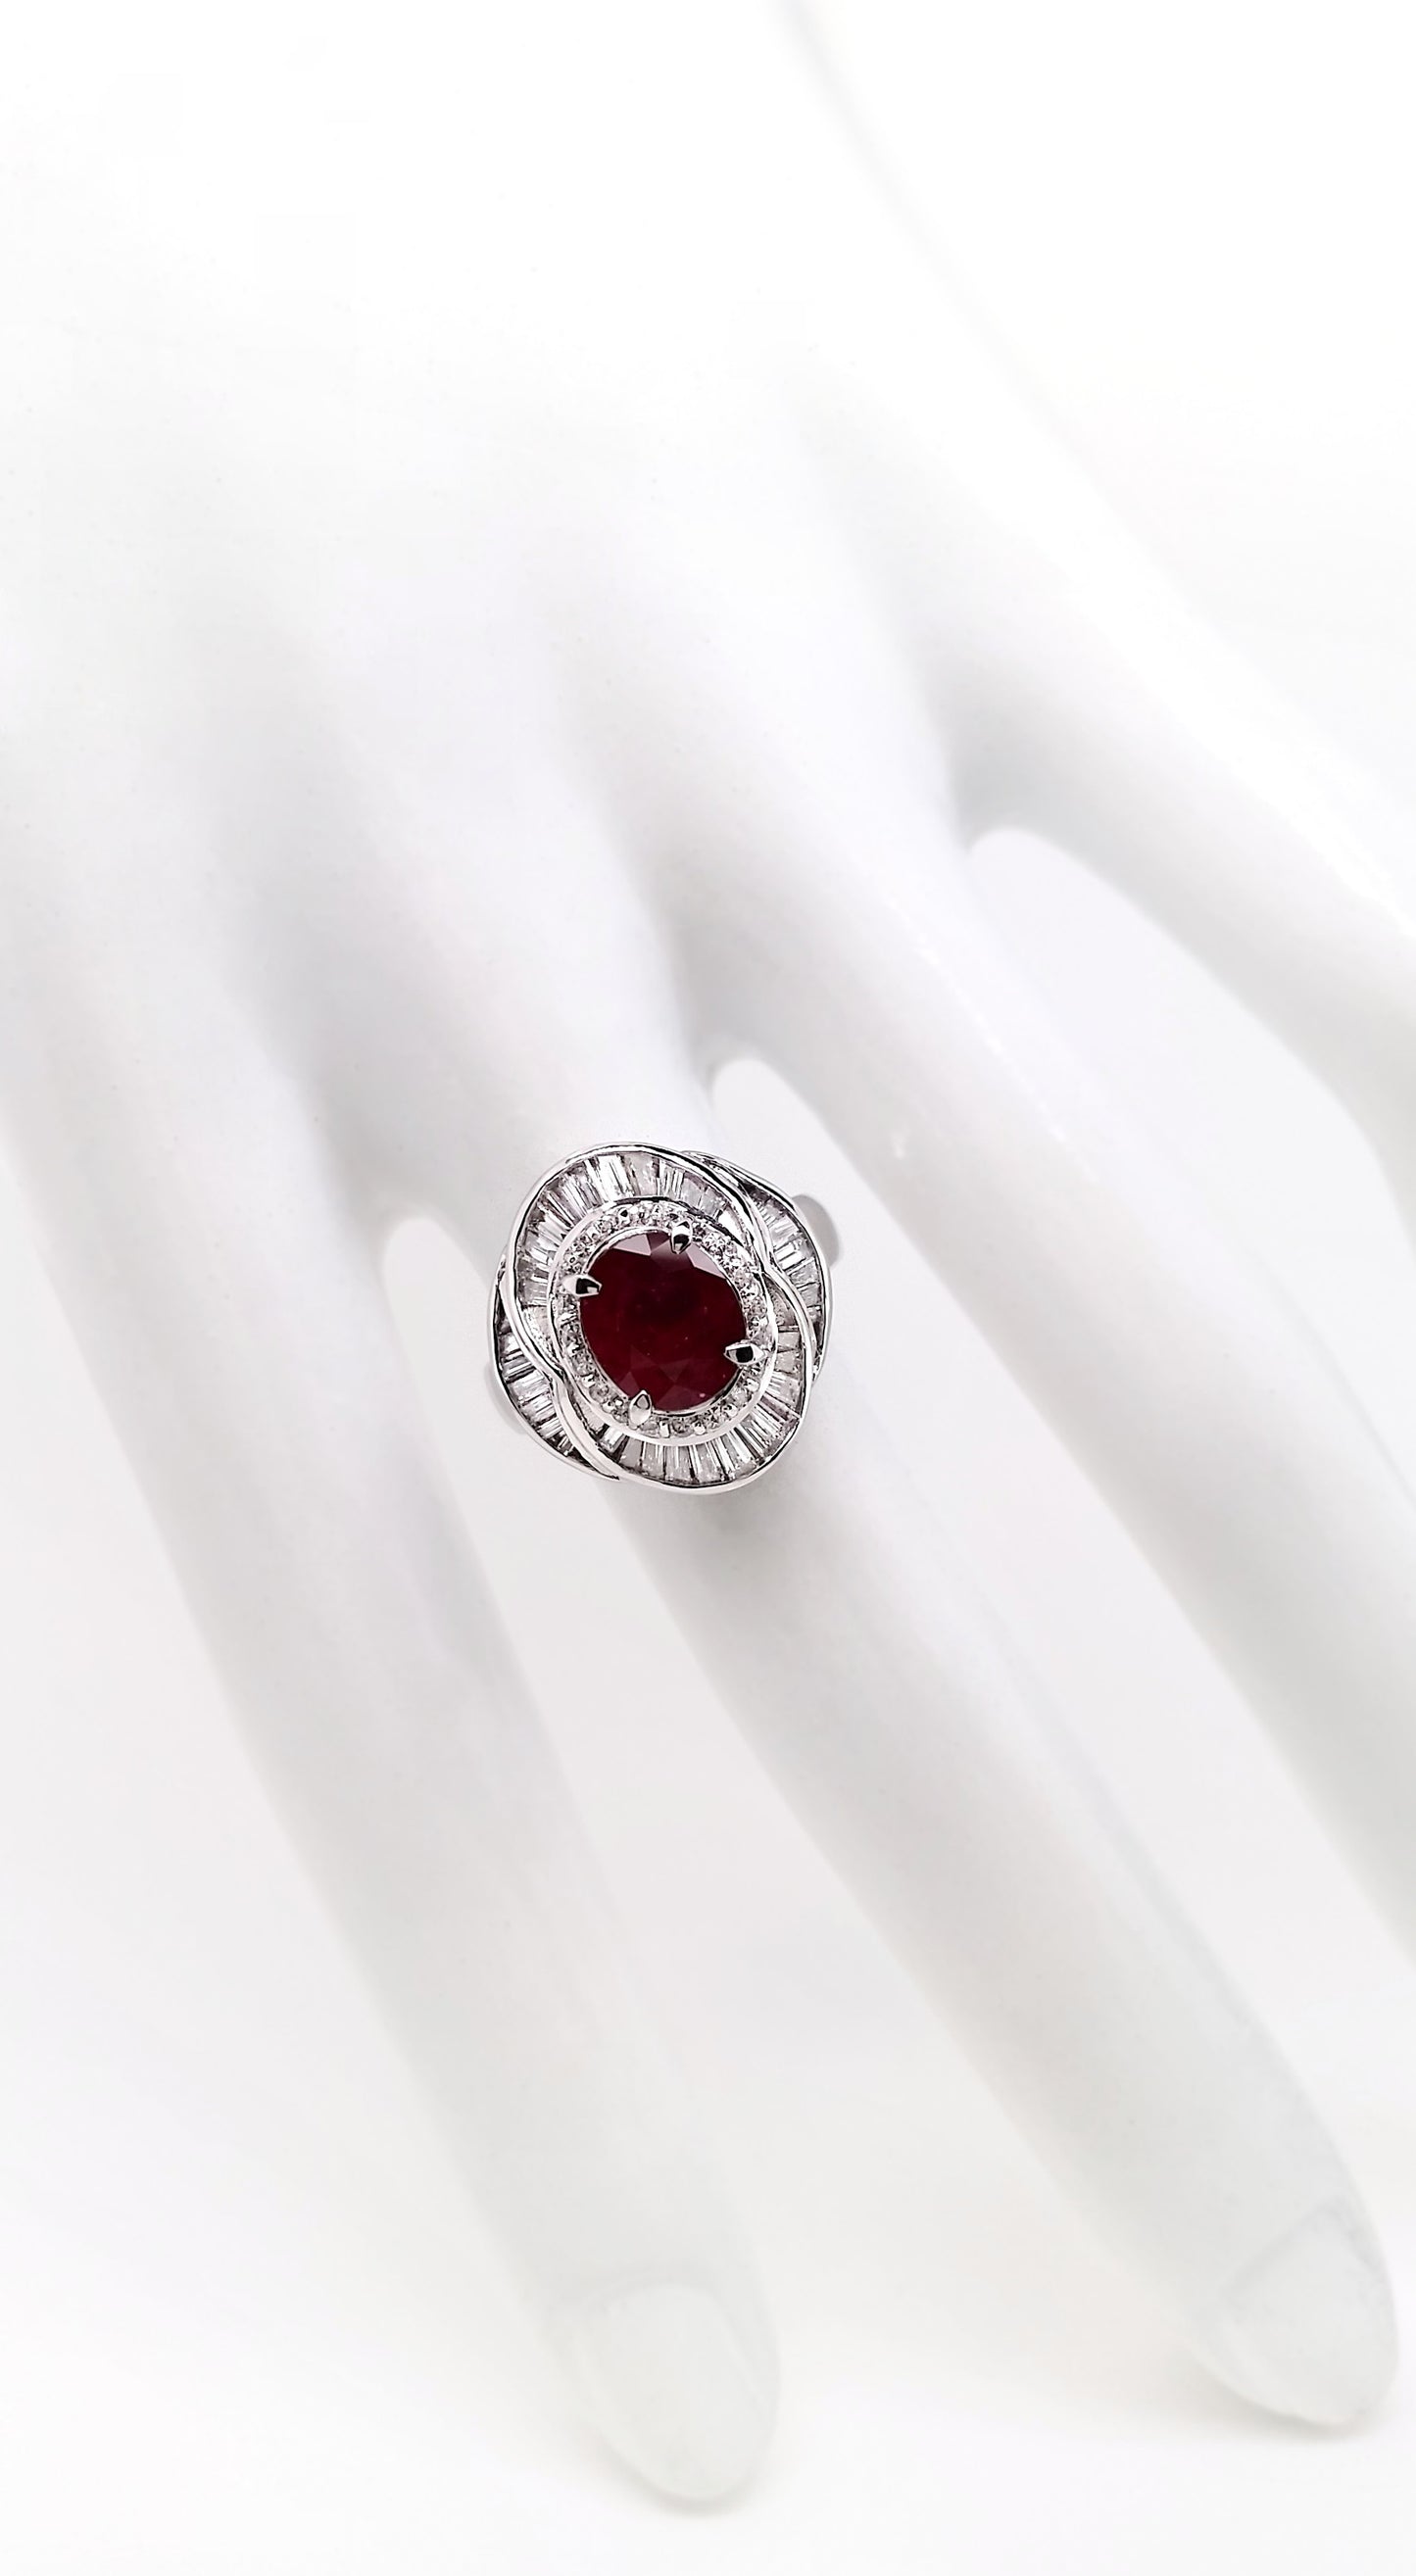 1.65ct NATURAL RUBY accented by 0.95ct NATURAL DIAMONDS Ring set in Platinum - SALE